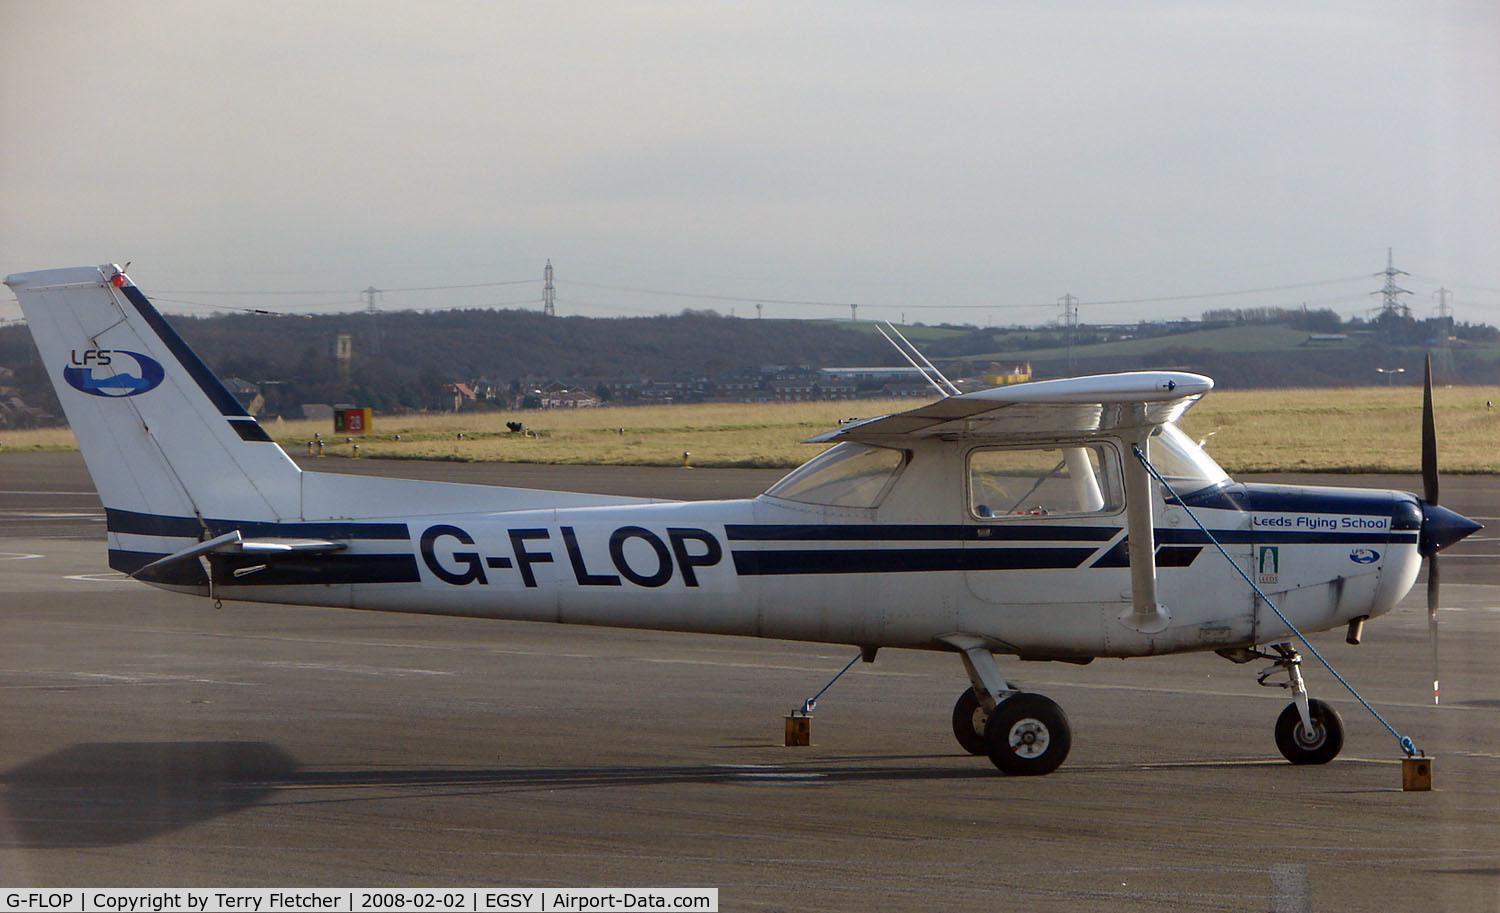 G-FLOP, 1979 Cessna 152 C/N 152-82590, Cessna 152 at Sheffield in Feb 2008